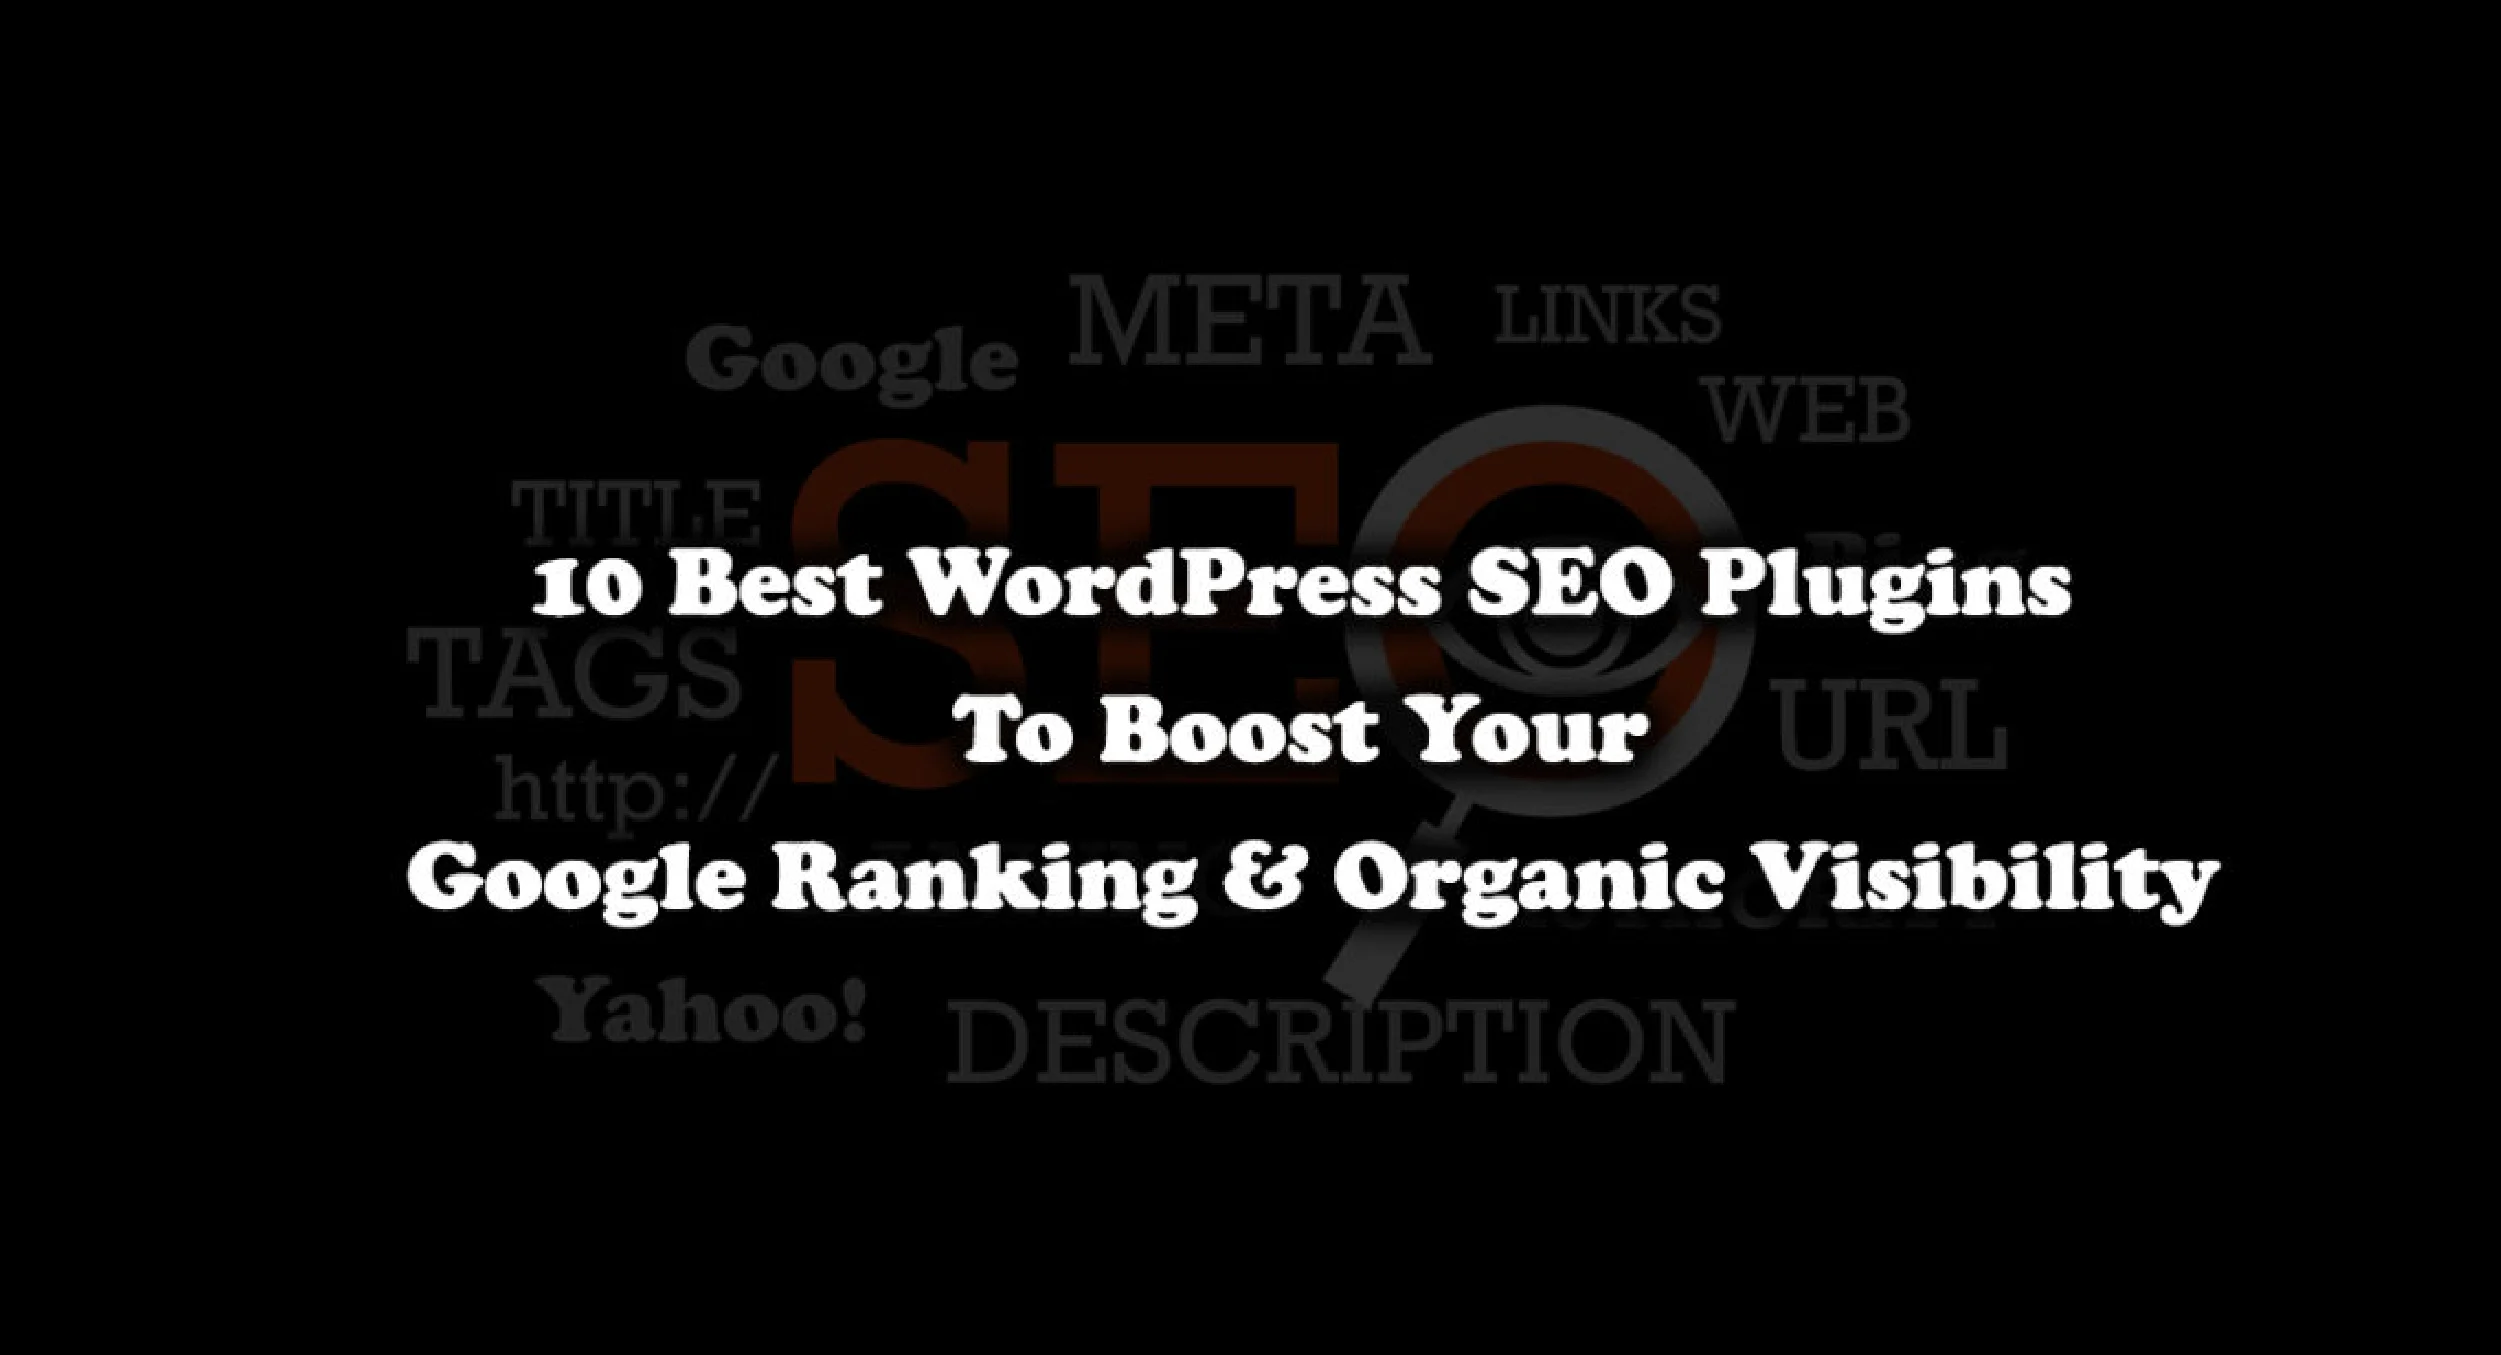 10 Best WordPress SEO Plugins to improve your Google Ranking and Organic Visibility